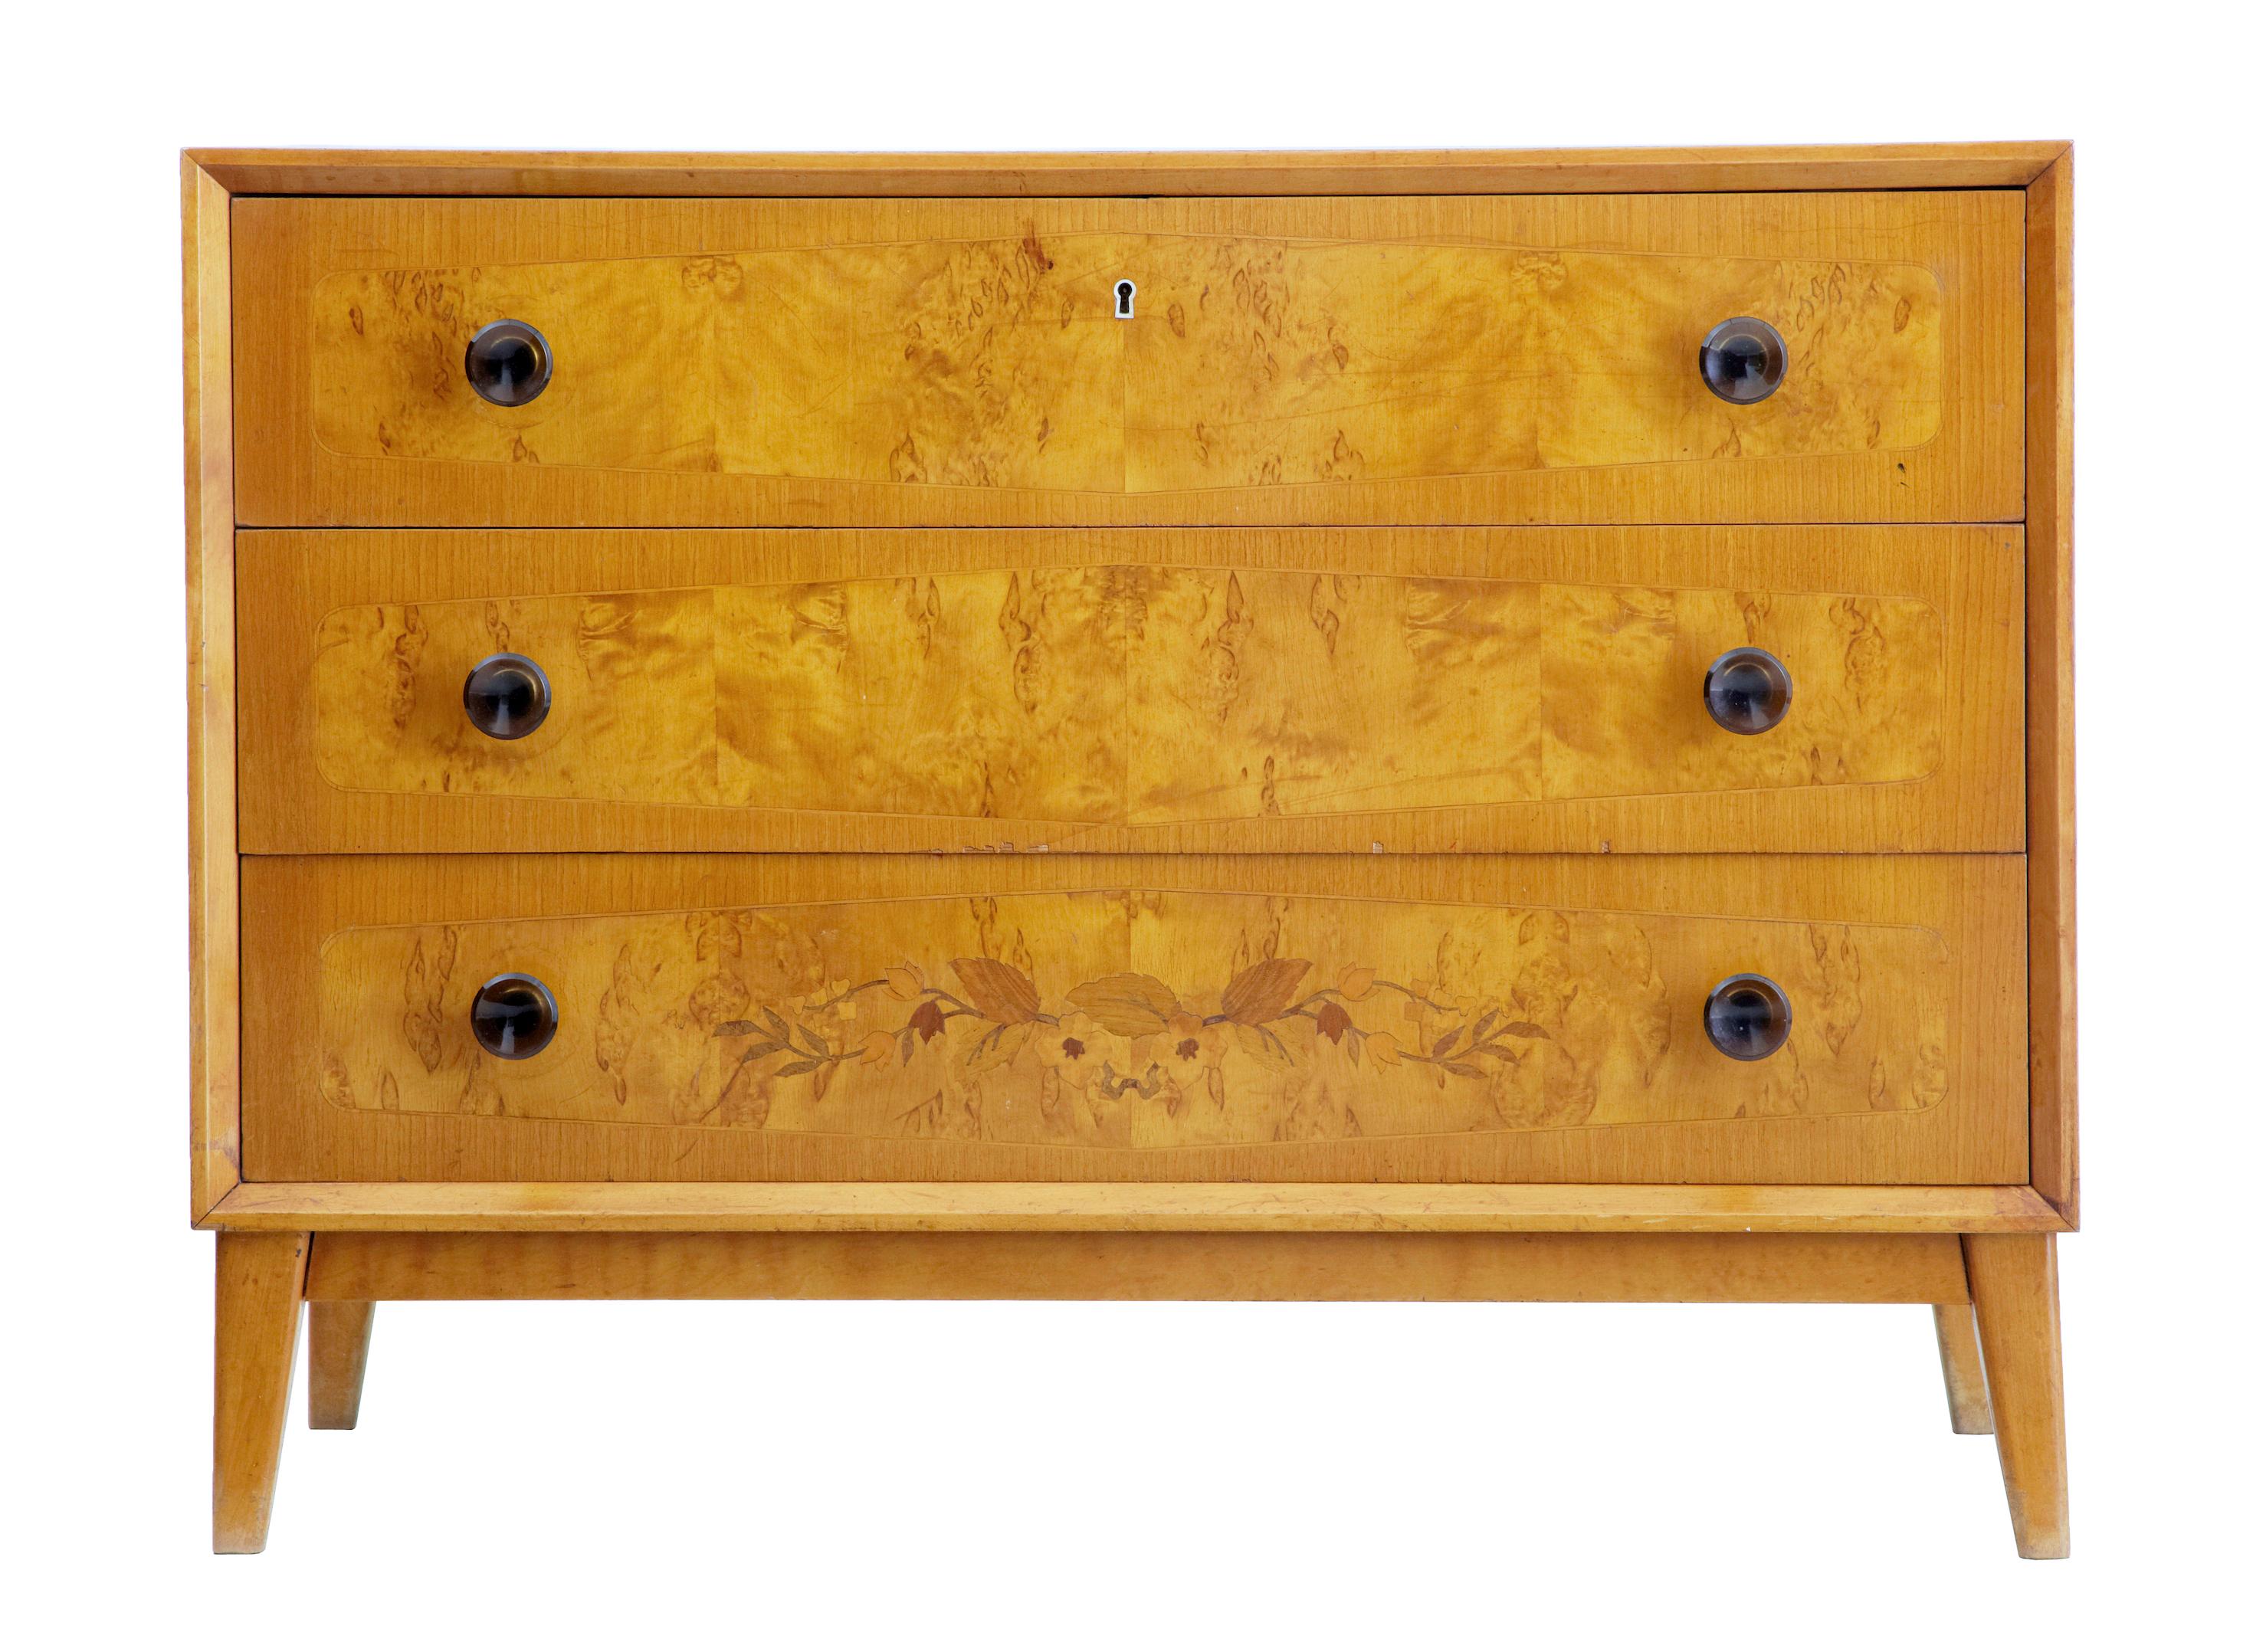 1950s Art Deco inspired birch inlaid chest of drawers

3-drawer chest with inlaid bottom drawer, circa 1950. crossbanded and strung drawer fronts, with faux colored glass handles. Standing on tapering legs. Good color and very stylish. Minor